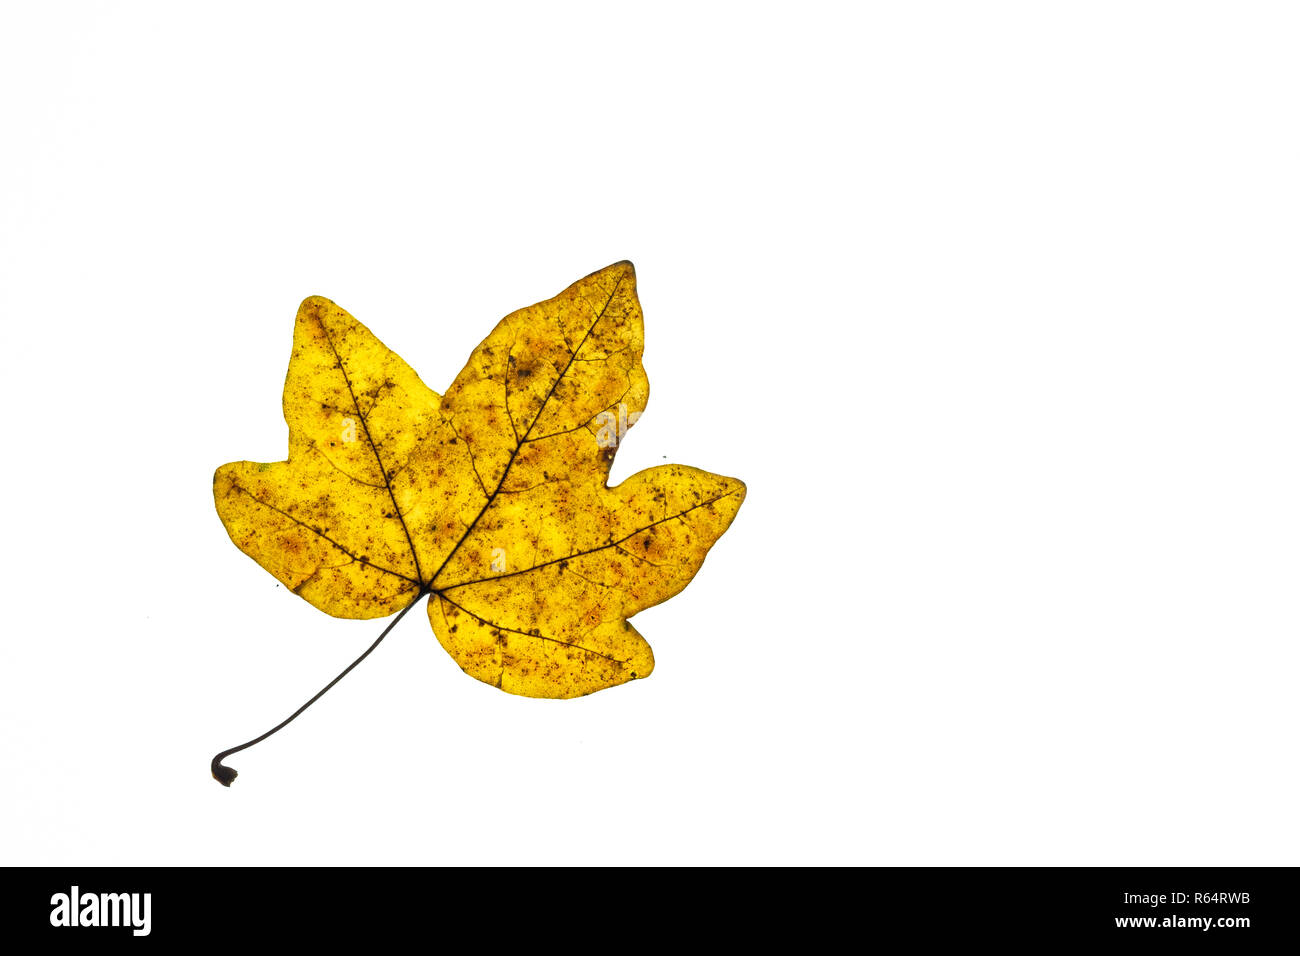 yellow leaf from the maple tree in autumn Stock Photo